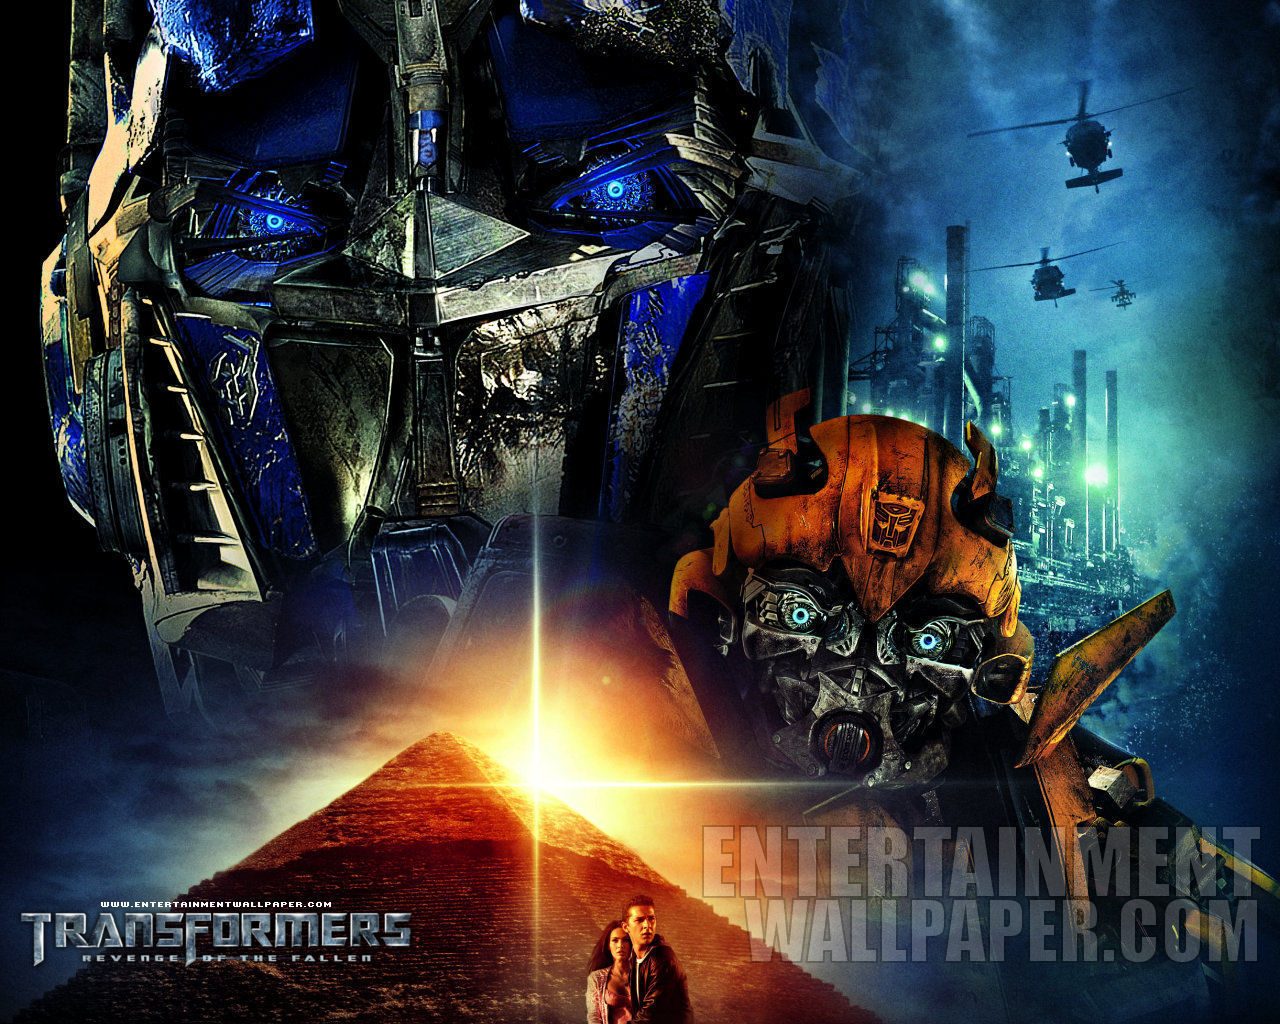 Transformers: Revenge of the Fallen instal the new